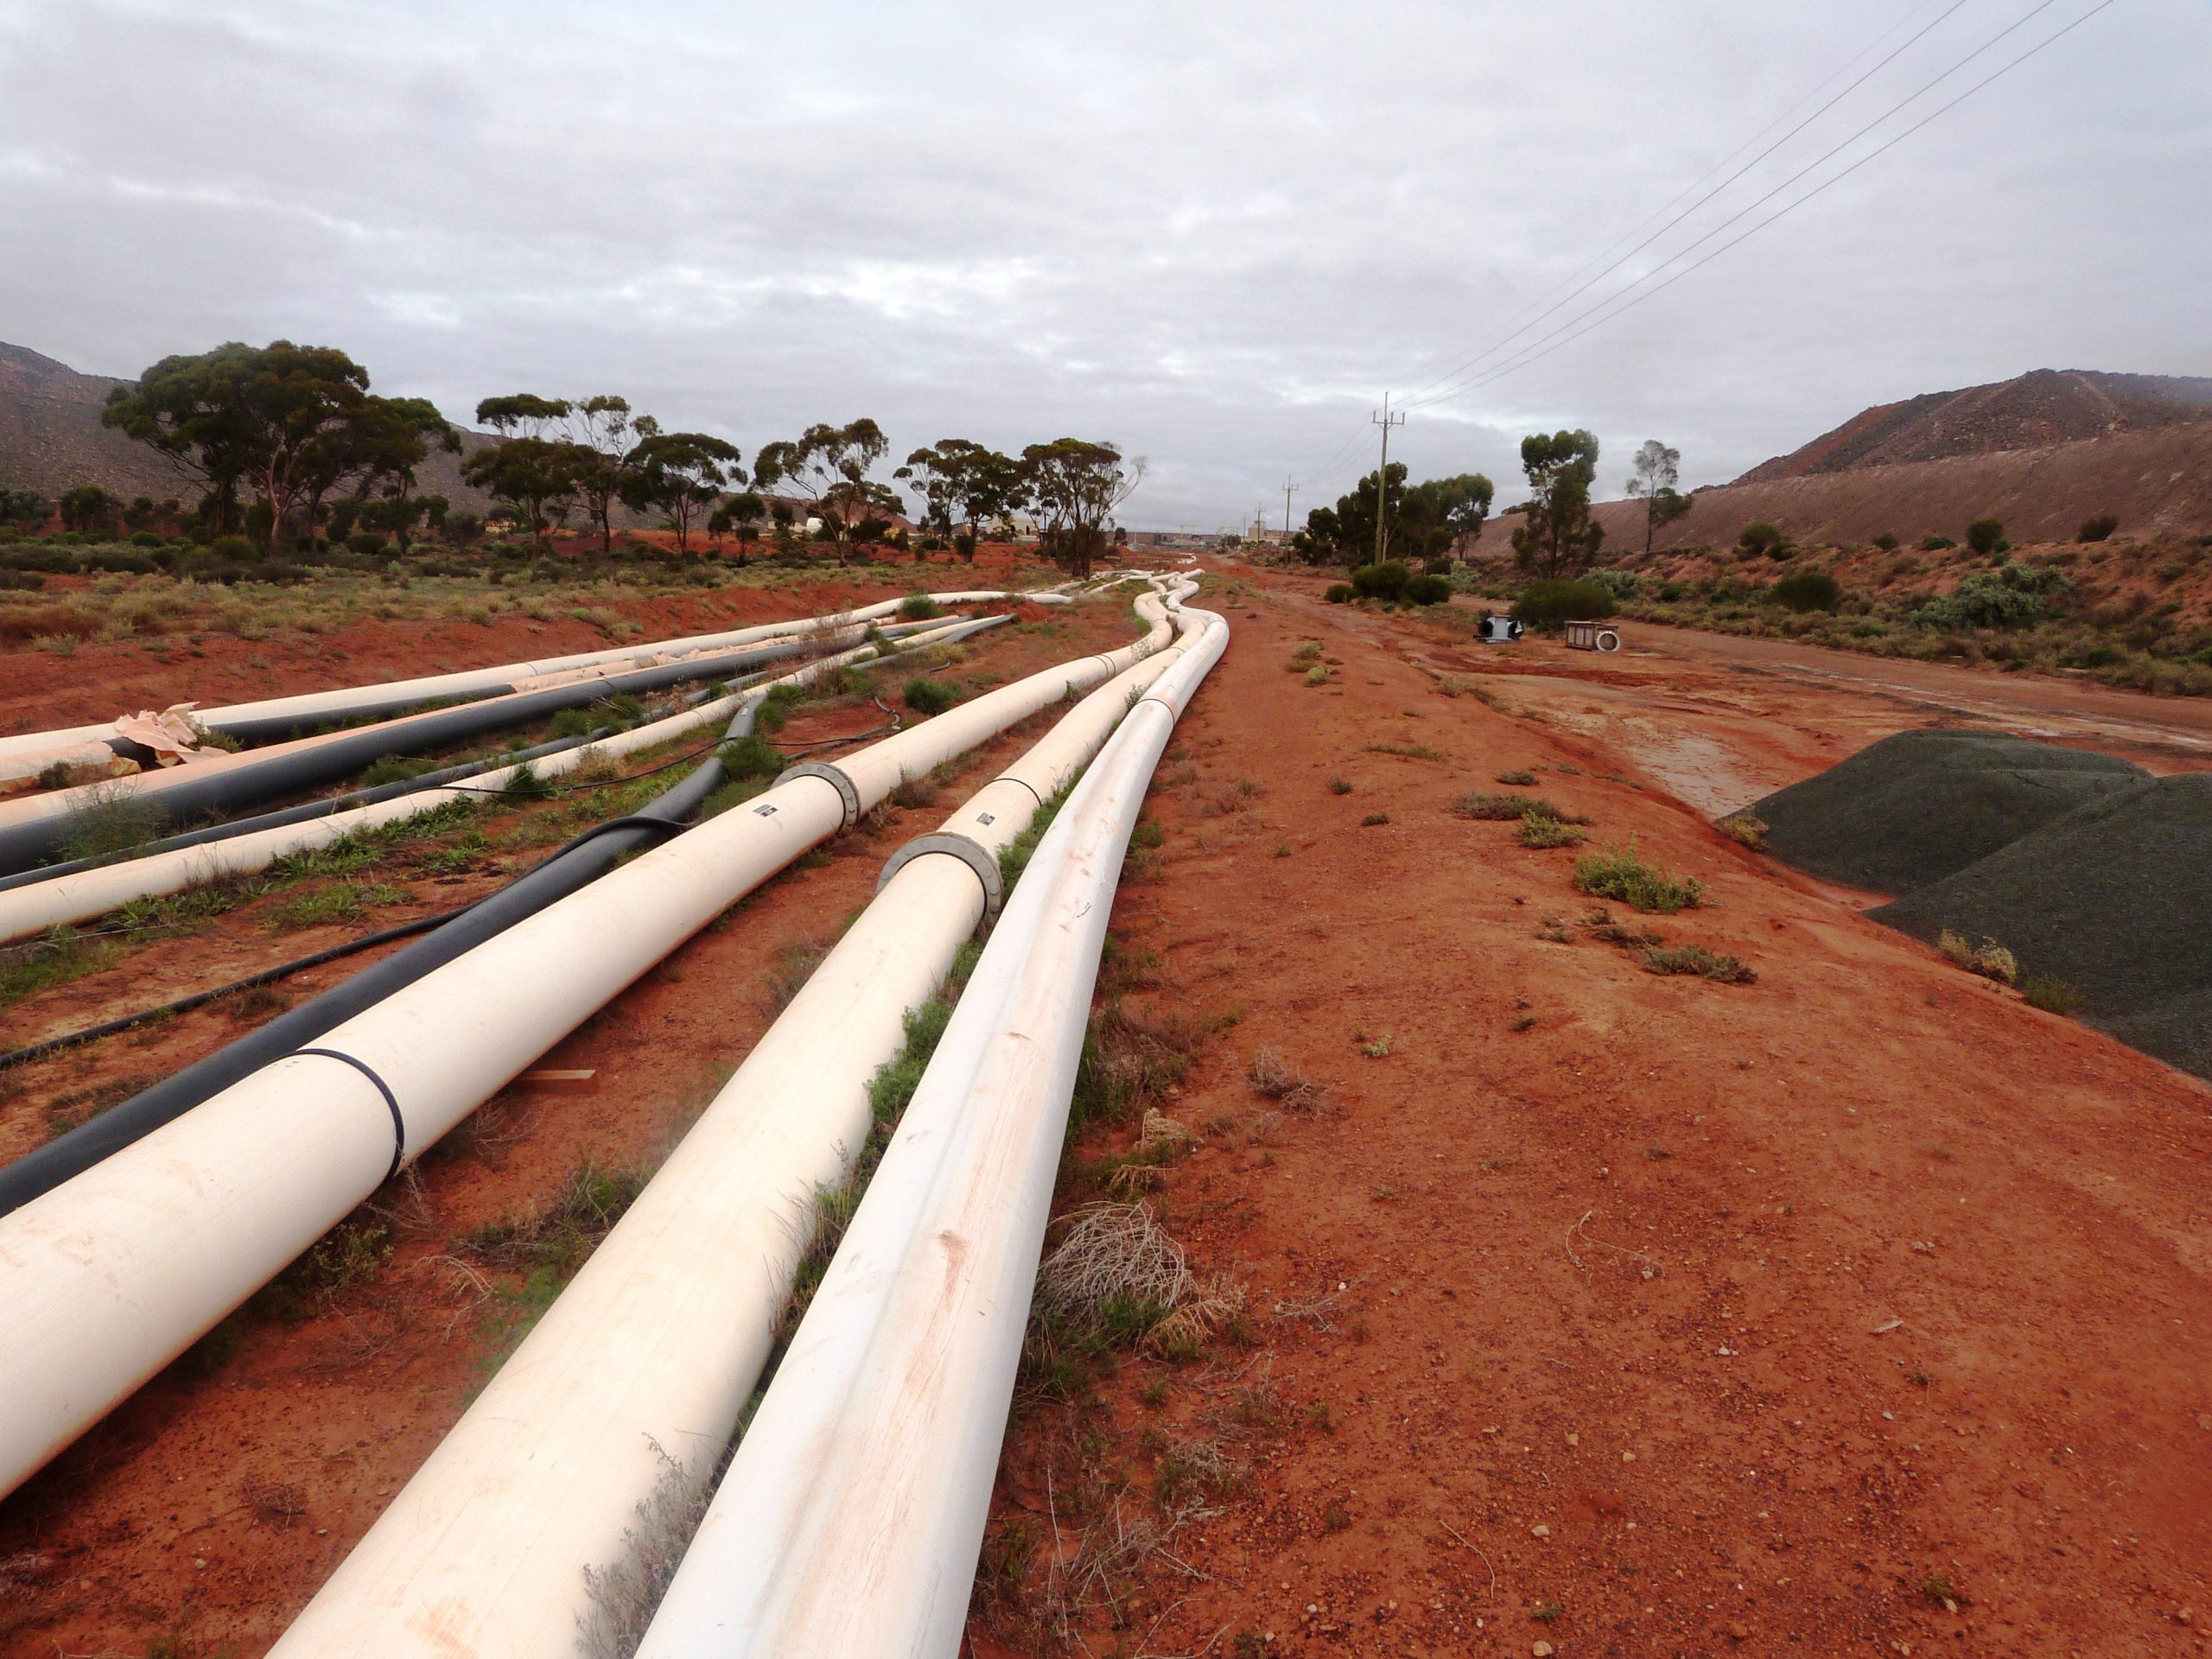 HDPE Pipeline in a harsh Australian environment scaled